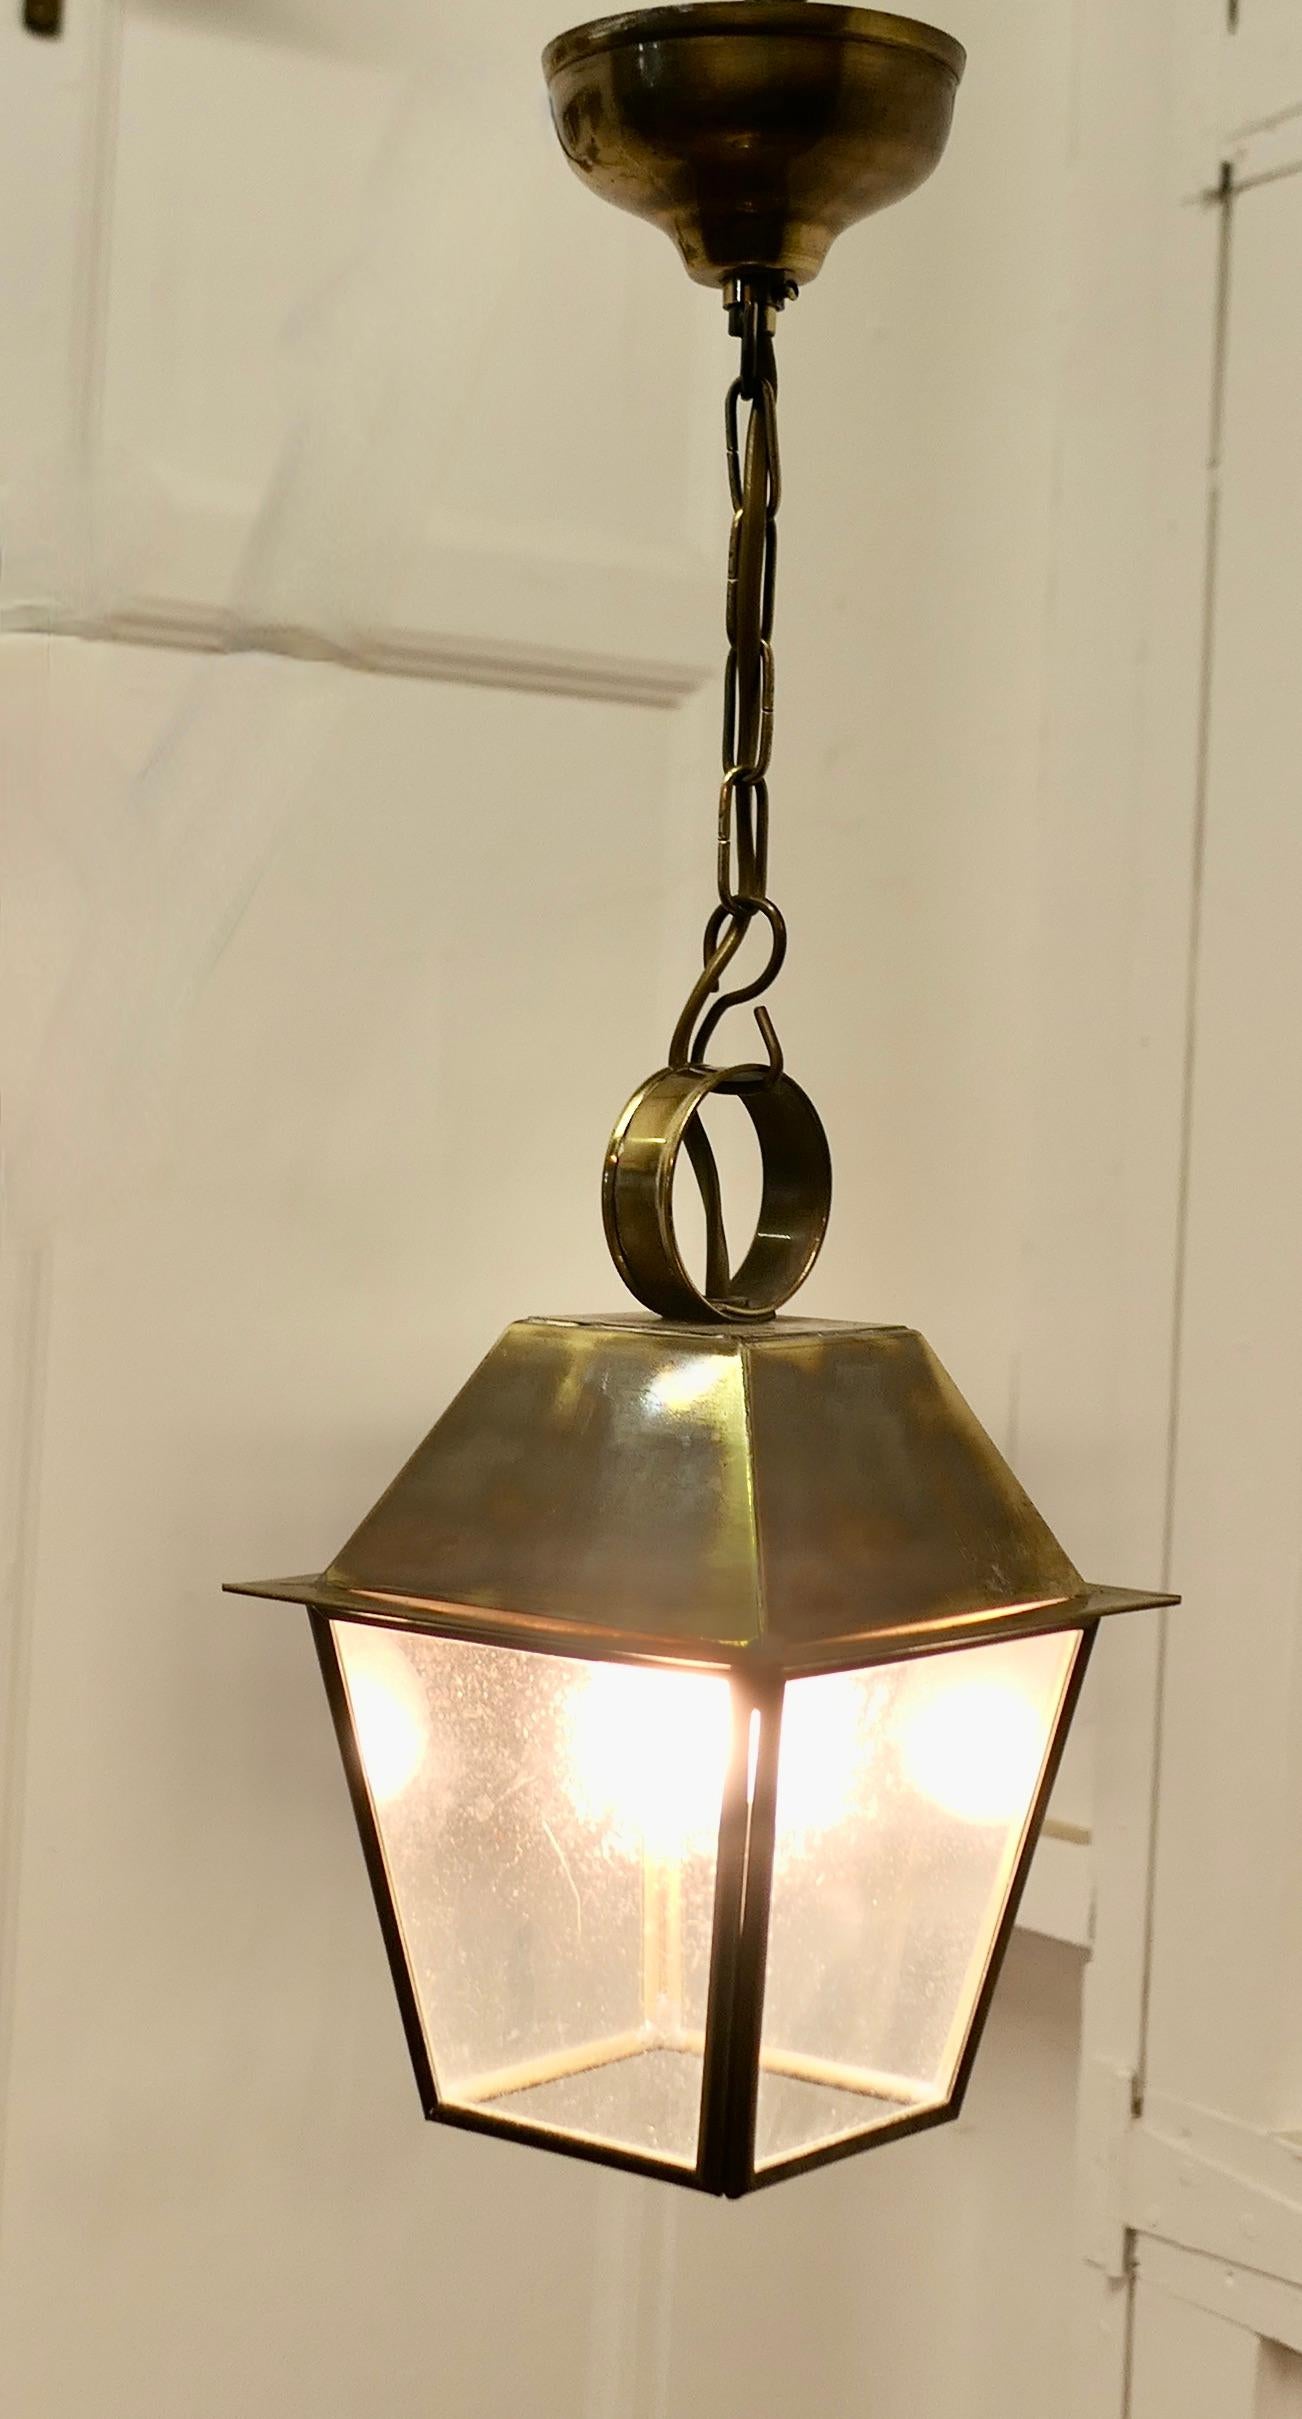 Small Dainty Brass Pendant Lantern

This is a dainty Lantern it has 4 glazed sides
The lamp is wired for electricity and ready to  hang it will have to be connected to an electrical supply
This is a very attractive piece for when a larger piece is